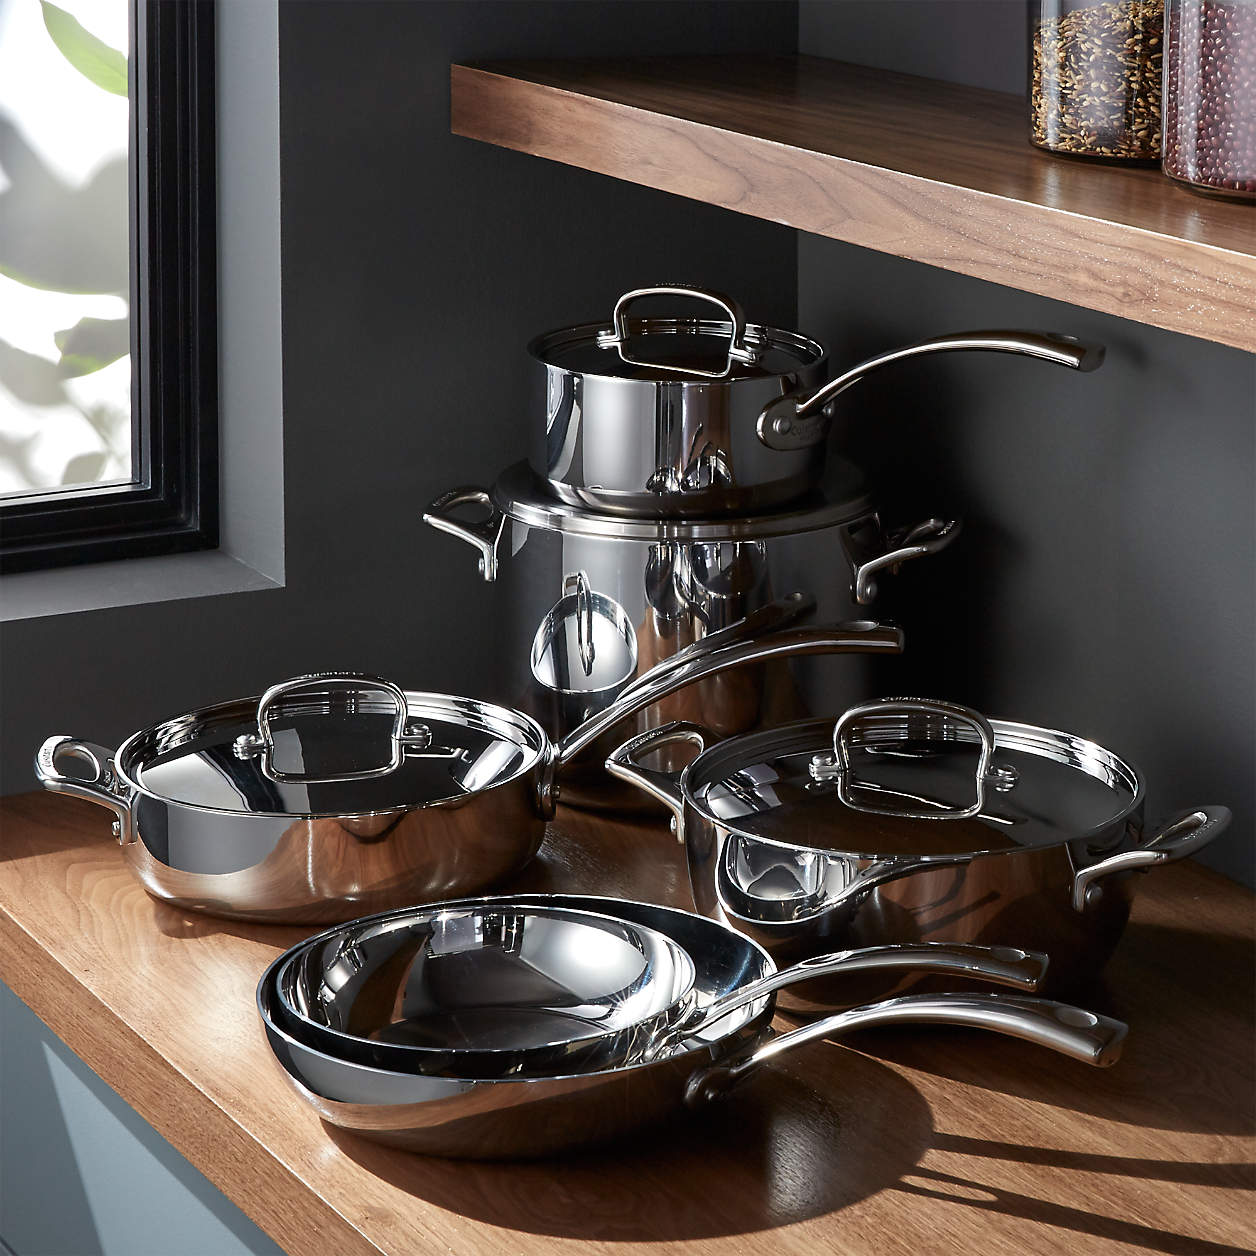 Cuisinart French Classic Stainless Steel 10-Piece Cookware Set Cuisinart Stainless Steel Cookware Set Reviews